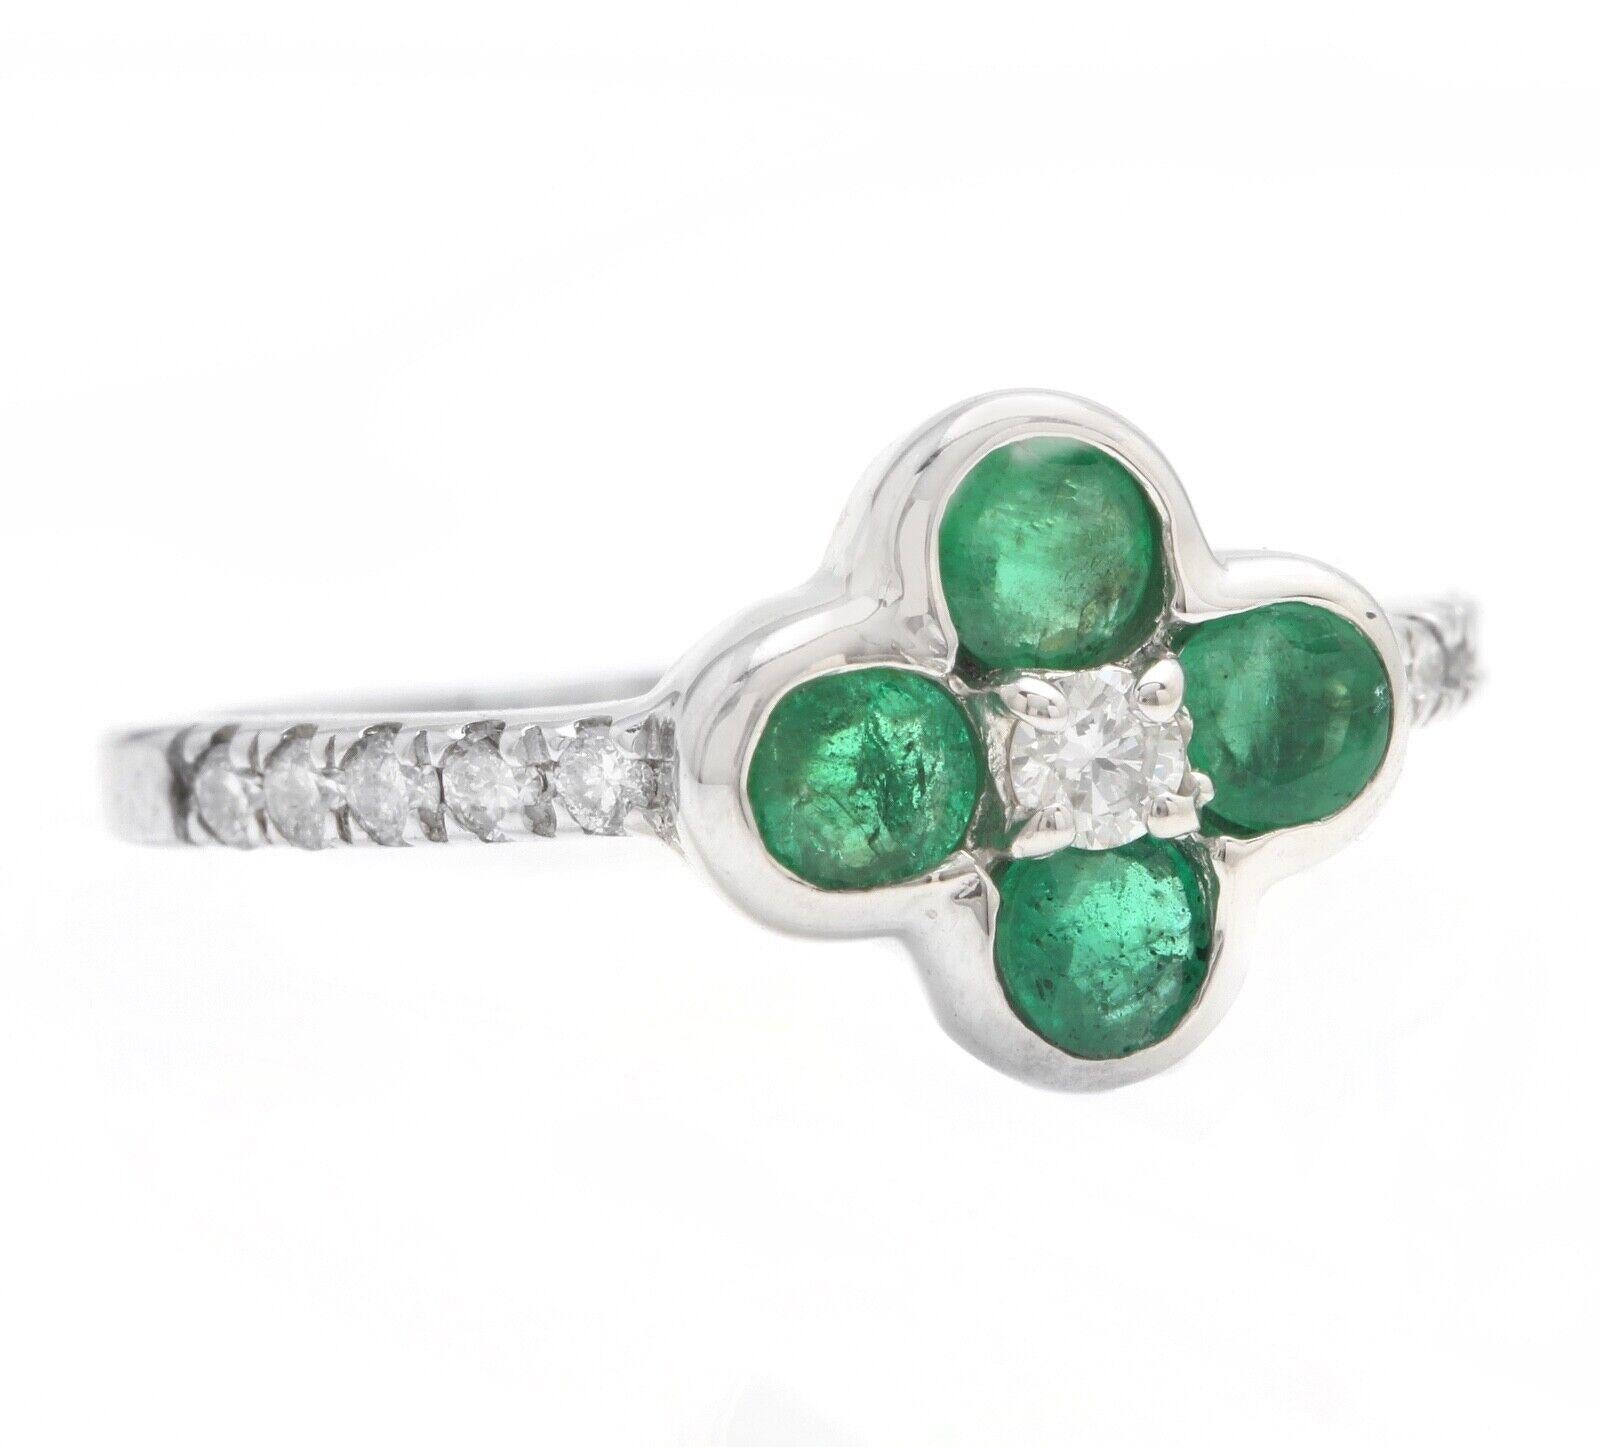 Exquisite Natural Emerald and Diamond 14K Solid White Gold Ring

Suggested Replacement Value: $5,500.00

Total Natural Green Emerald Weight is: Approx. 0.70 Carats 

Natural Round Diamonds Weight: Approx. 0.20 Carats (color G-H / Clarity SI)

Head